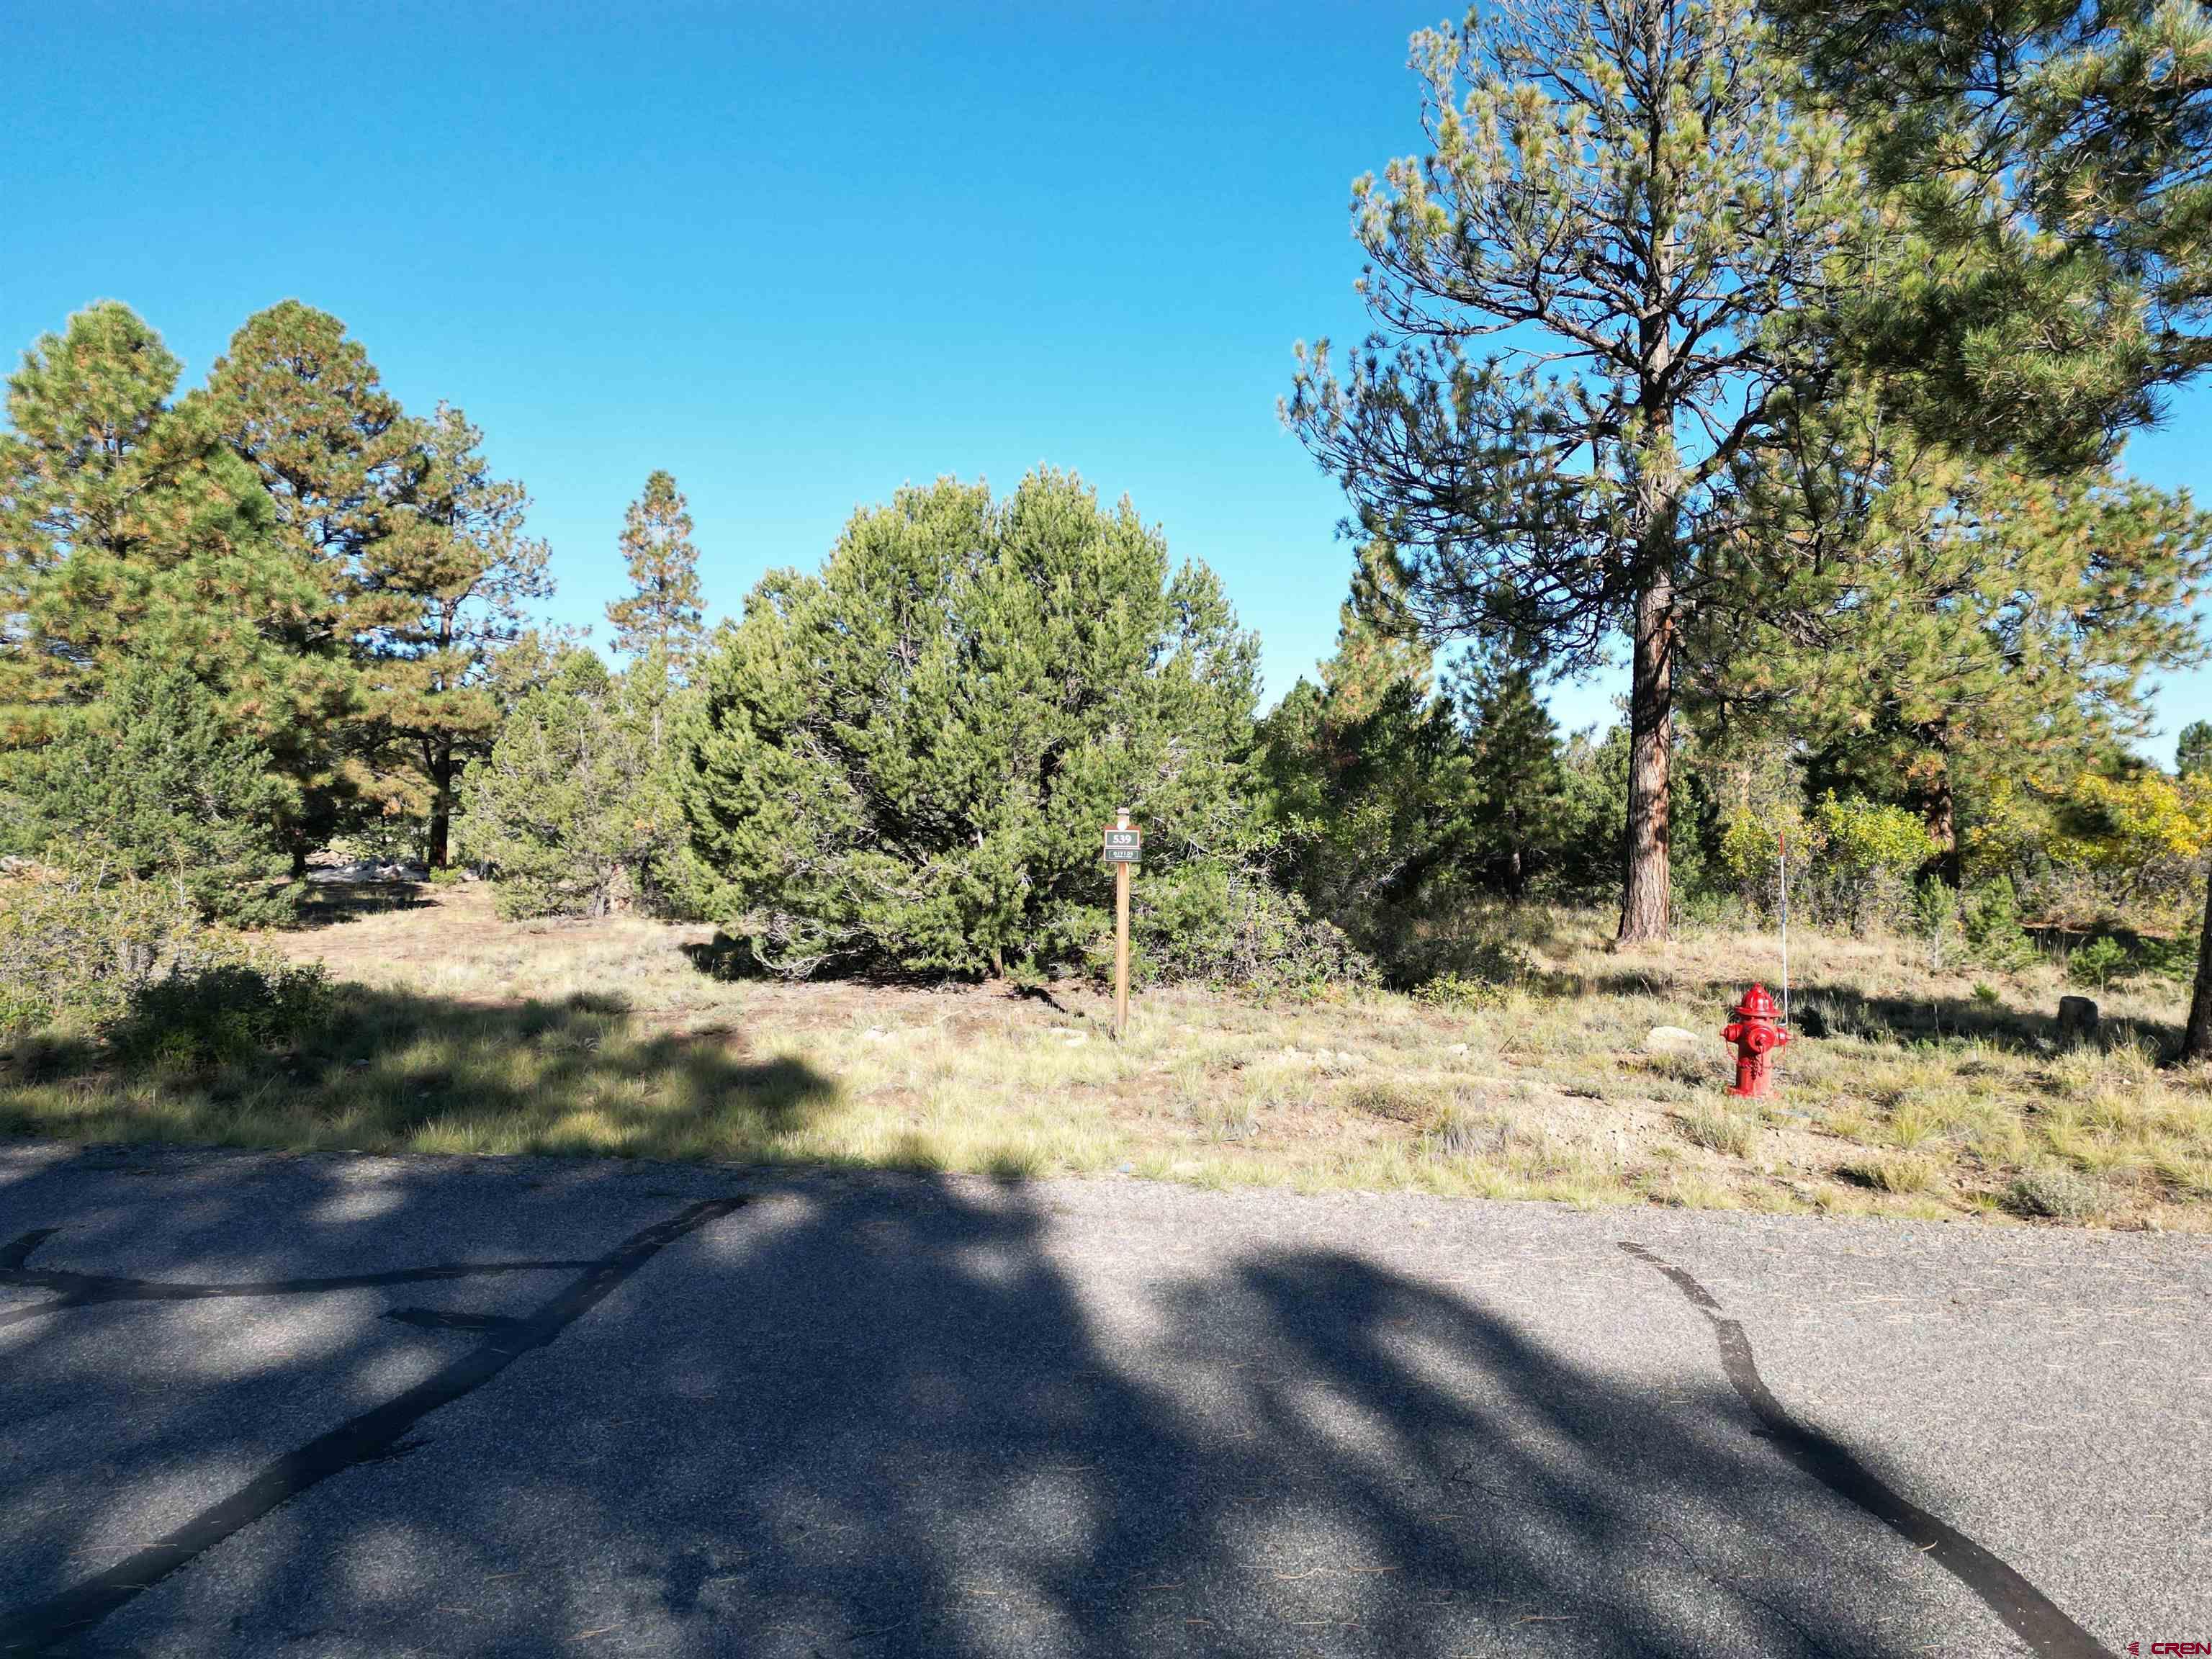 Escape to Divide Ranch & Club and enjoy all that this community has to offer with this amazing 0.953 acre lot. This  golf course frontage lot is overlooking the 17th fairway of the Divide 18 hole Award Winning Golf Course with 8,600 square foot clubhouse. Design and build your Colorado golf retreat on this beautiful lot with Ponderosa Pines and views of the surrounding mountain ranges. Located less than 8 miles to historic Ridgway known as the "Gateway to the San Juans" and where the original "True Grit" and "How the West was Won" movies were filmed. Other nearby attractions are Ouray which is known as the "Switzerland of America" and offers many hot springs for people to enjoy is just 10 miles away. The popular town of Telluride is an easy commute, a little over 30 miles away to enjoy world class skiing and summers full of cultural events and outdoor activities. Montrose Regional Airport is just 30 minutes away making it accessible to everyone. This is one of only a few developer serviced lots which includes paid water and sewer taps. A one time mandatory membership initiation fee of $15,000 for the Divide Ranch & Club is due at time of closing.